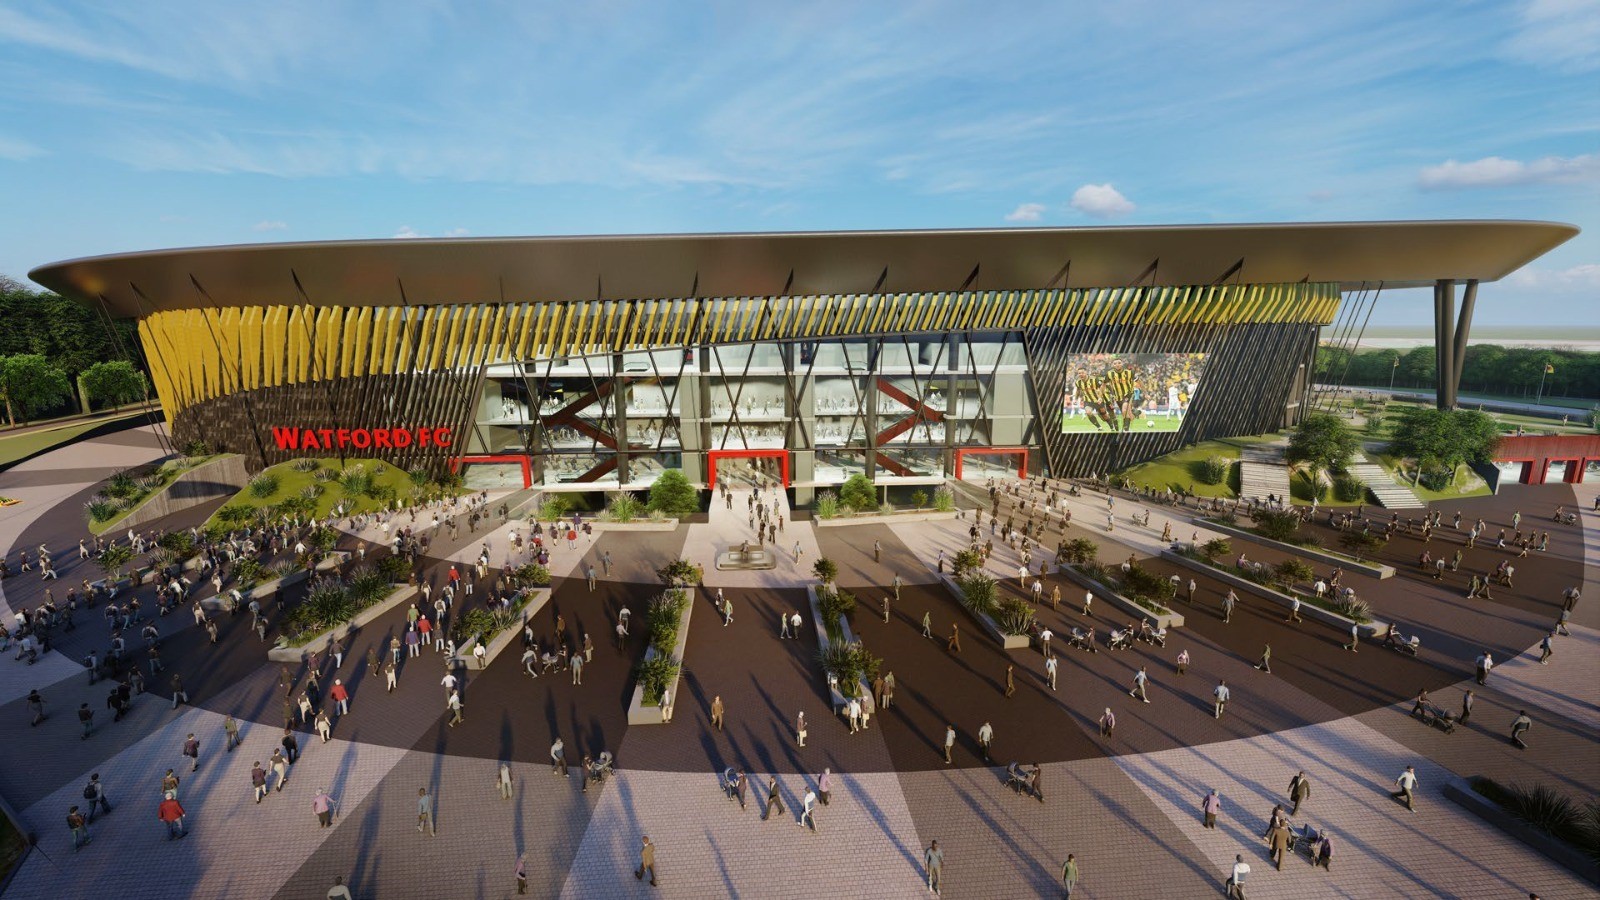 This stadium design, drawn up by an architect firm thought to be on the Bushey Hall site, was leaked last year